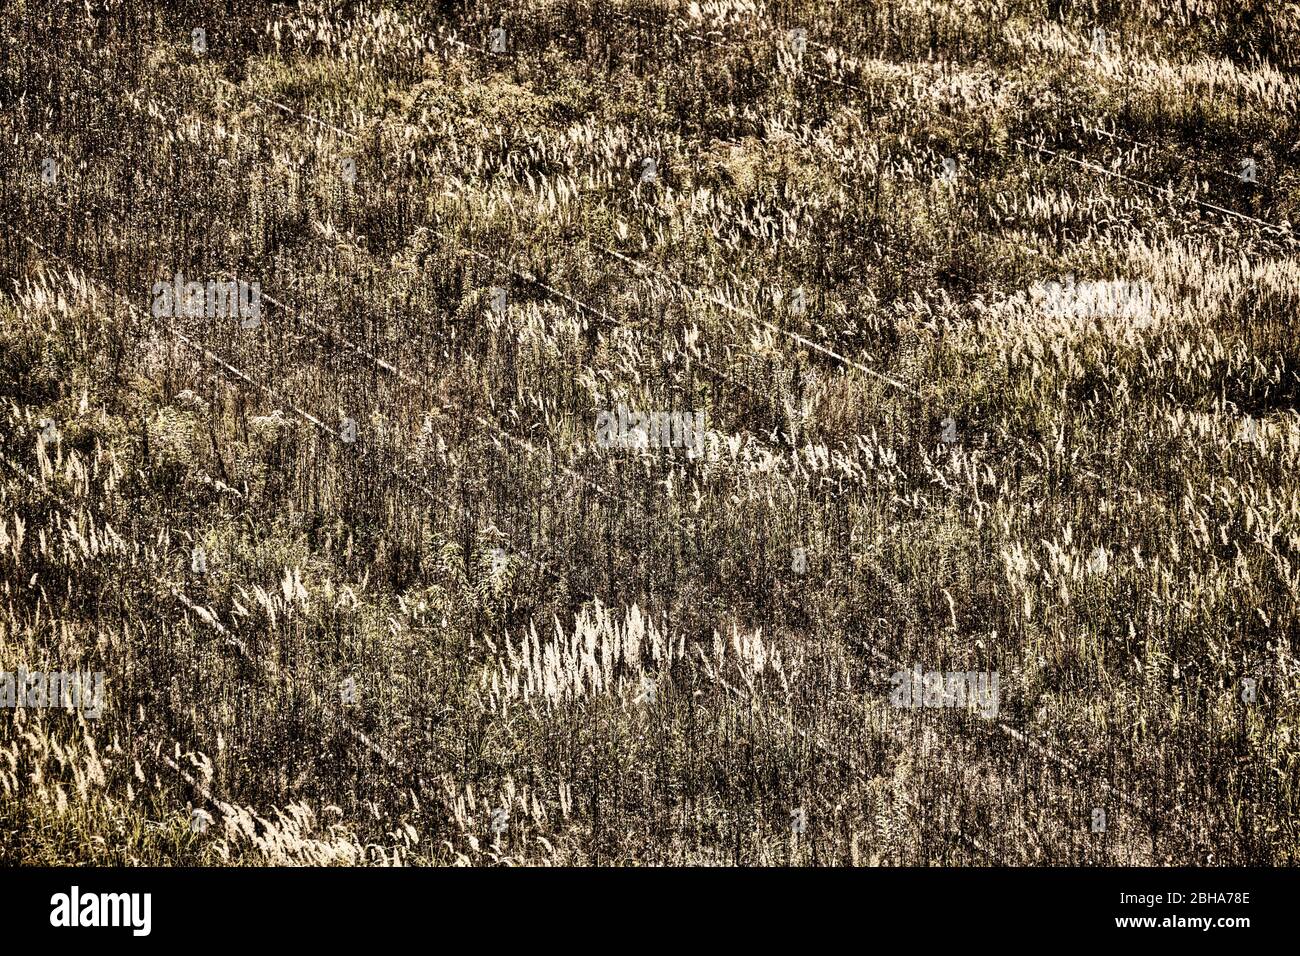 Track overgrown with grass, digitally processed, backlight, RailArt Stock Photo